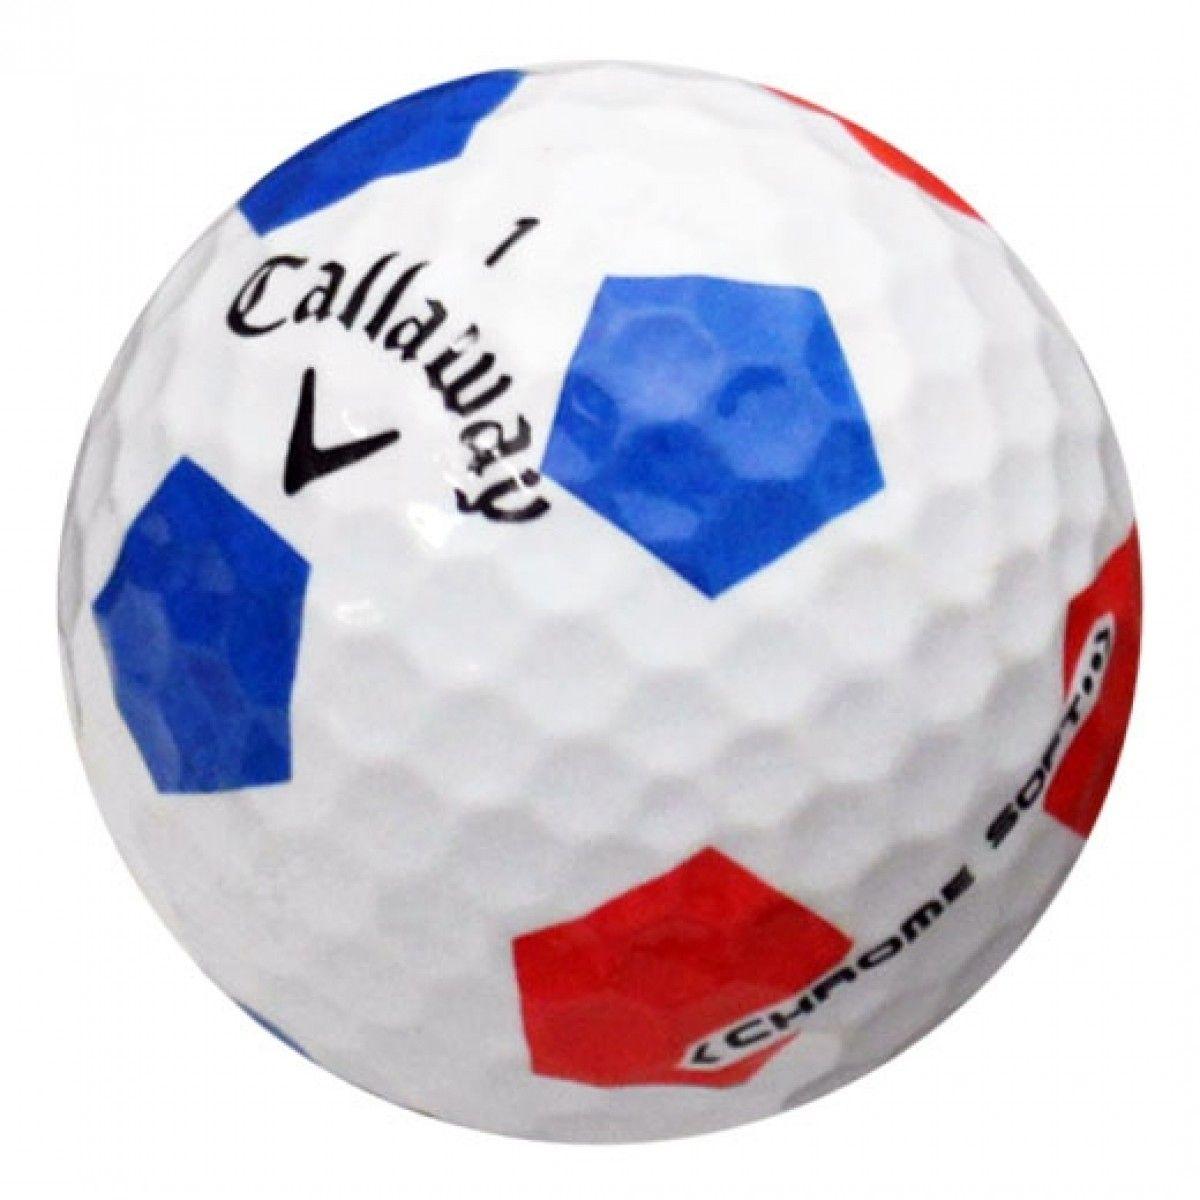 Red White and Blue C Logo - Rare Callaway Chrome Soft Truvis Prototype, White & Blue used